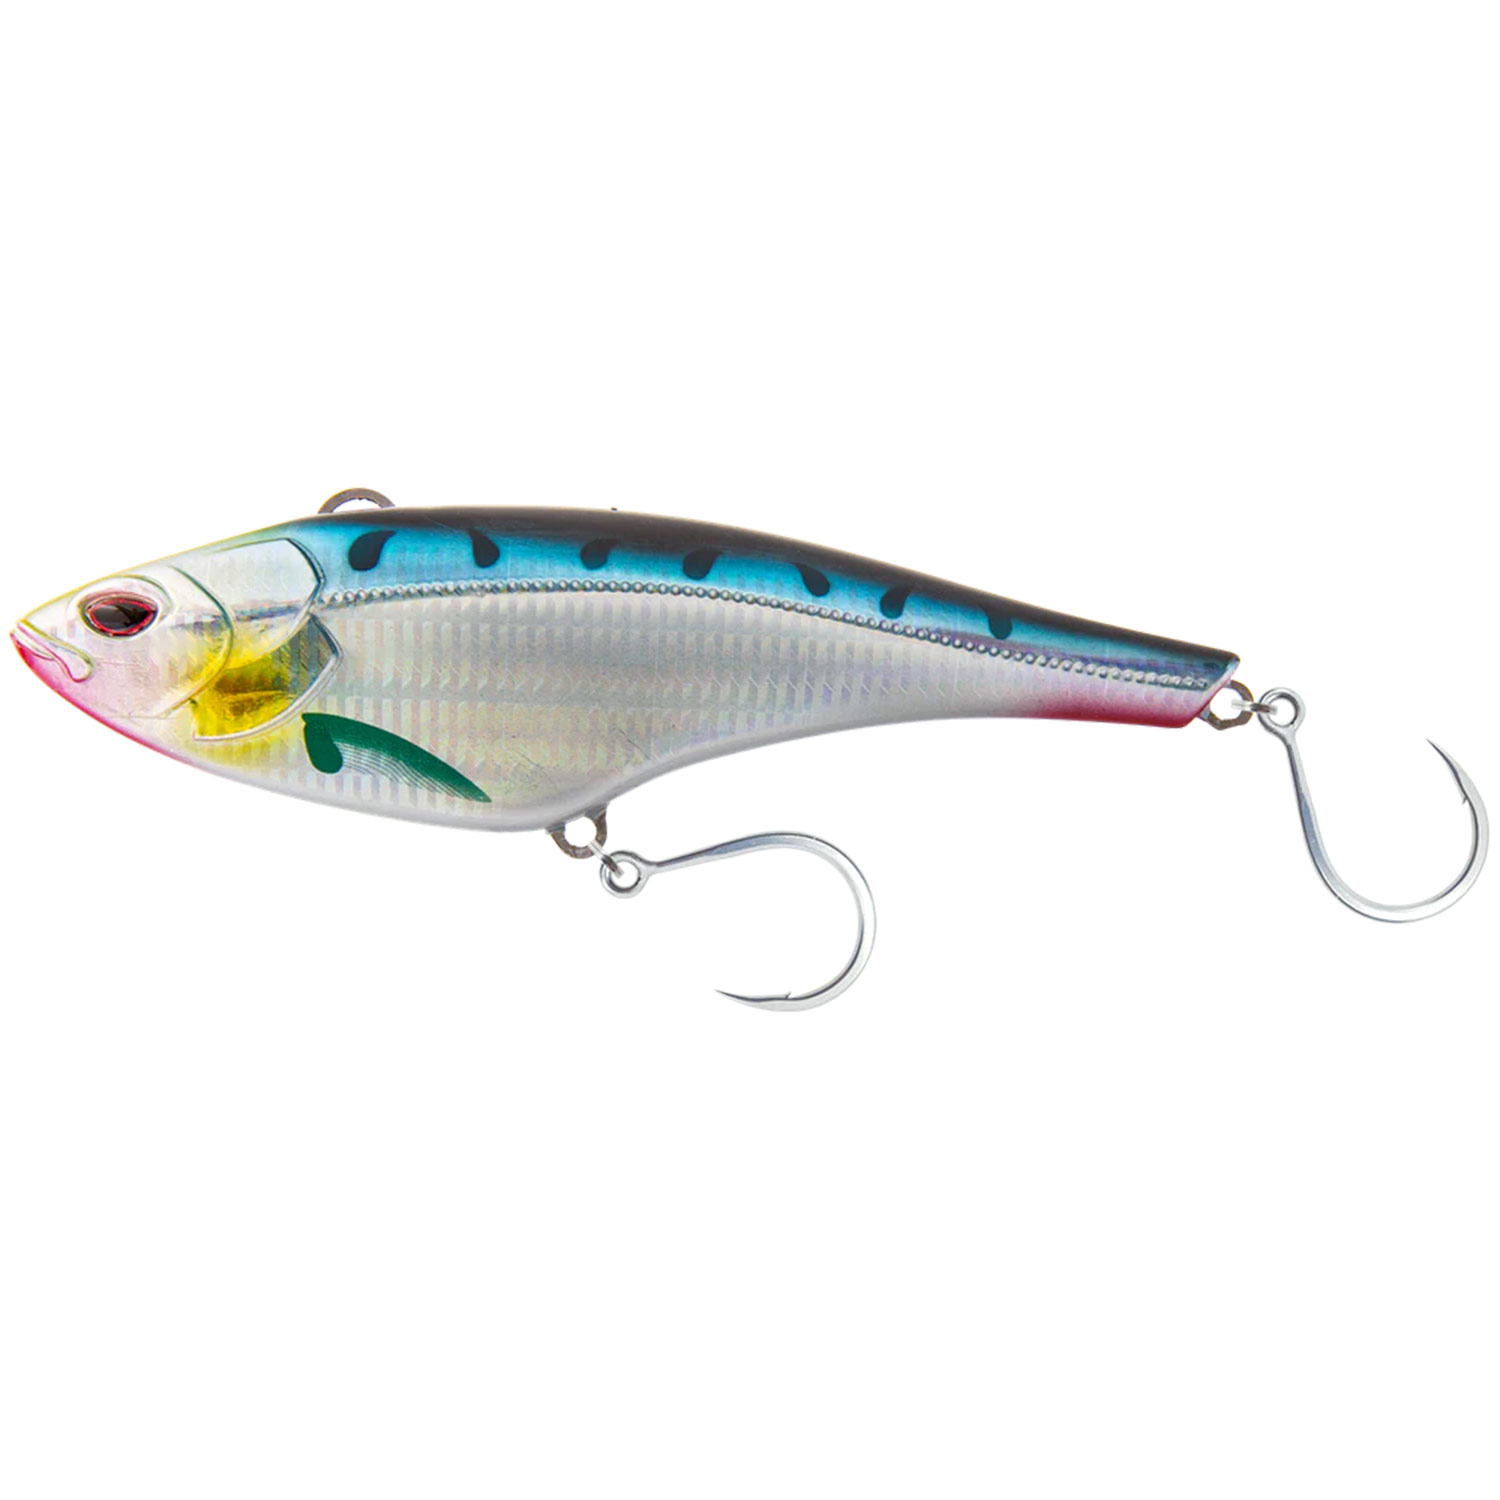 NOMAD DESIGN 6 Madmacs 160 Sinking High Speed Trolling Lure, 6